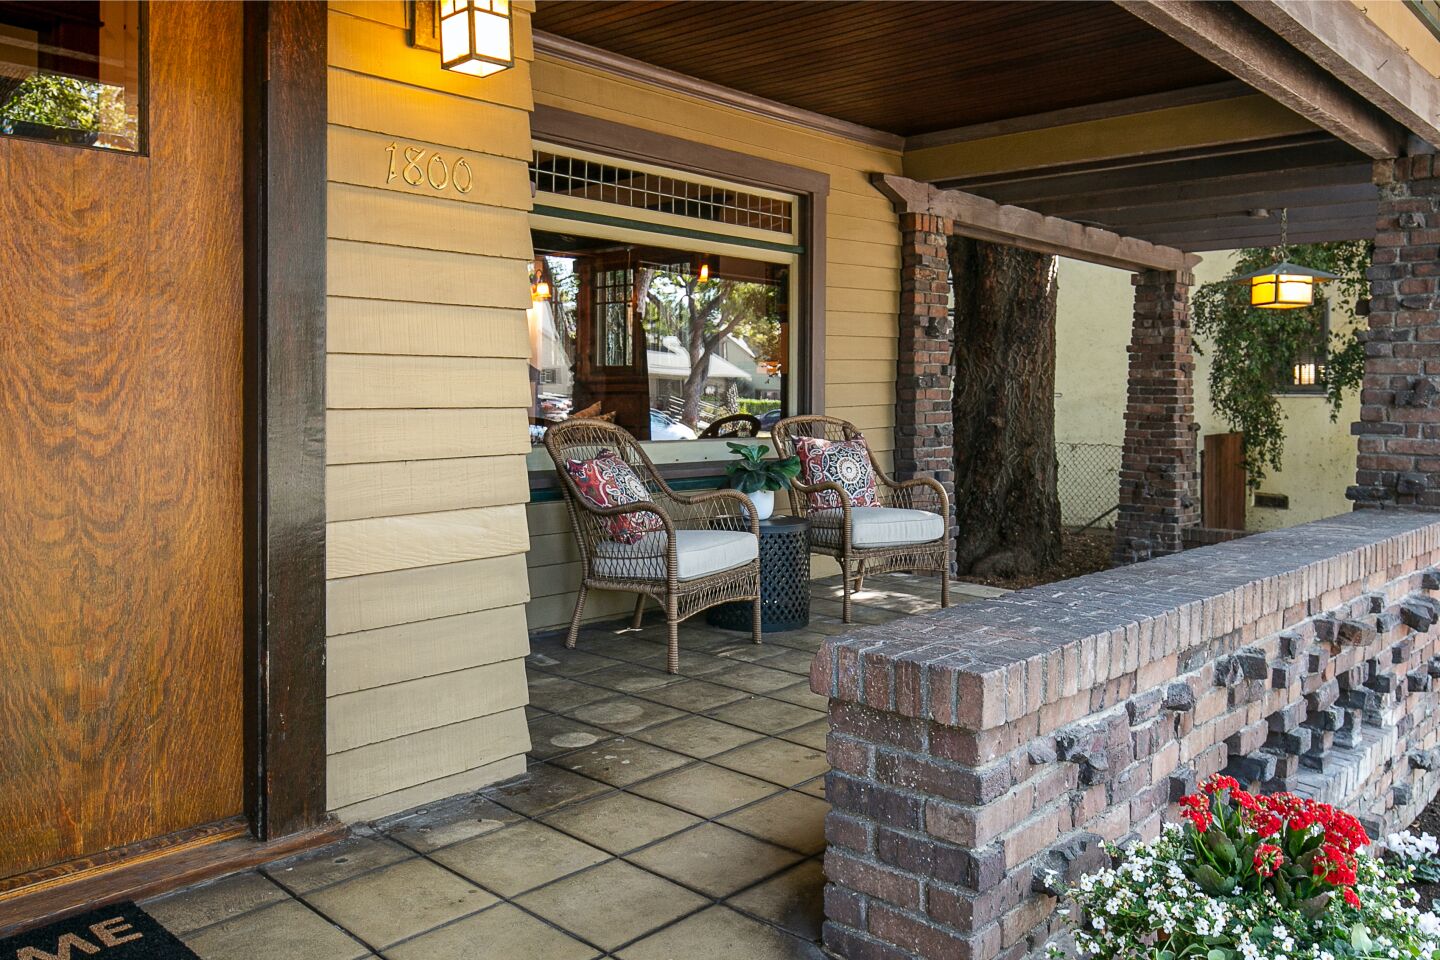 The covered front porch.